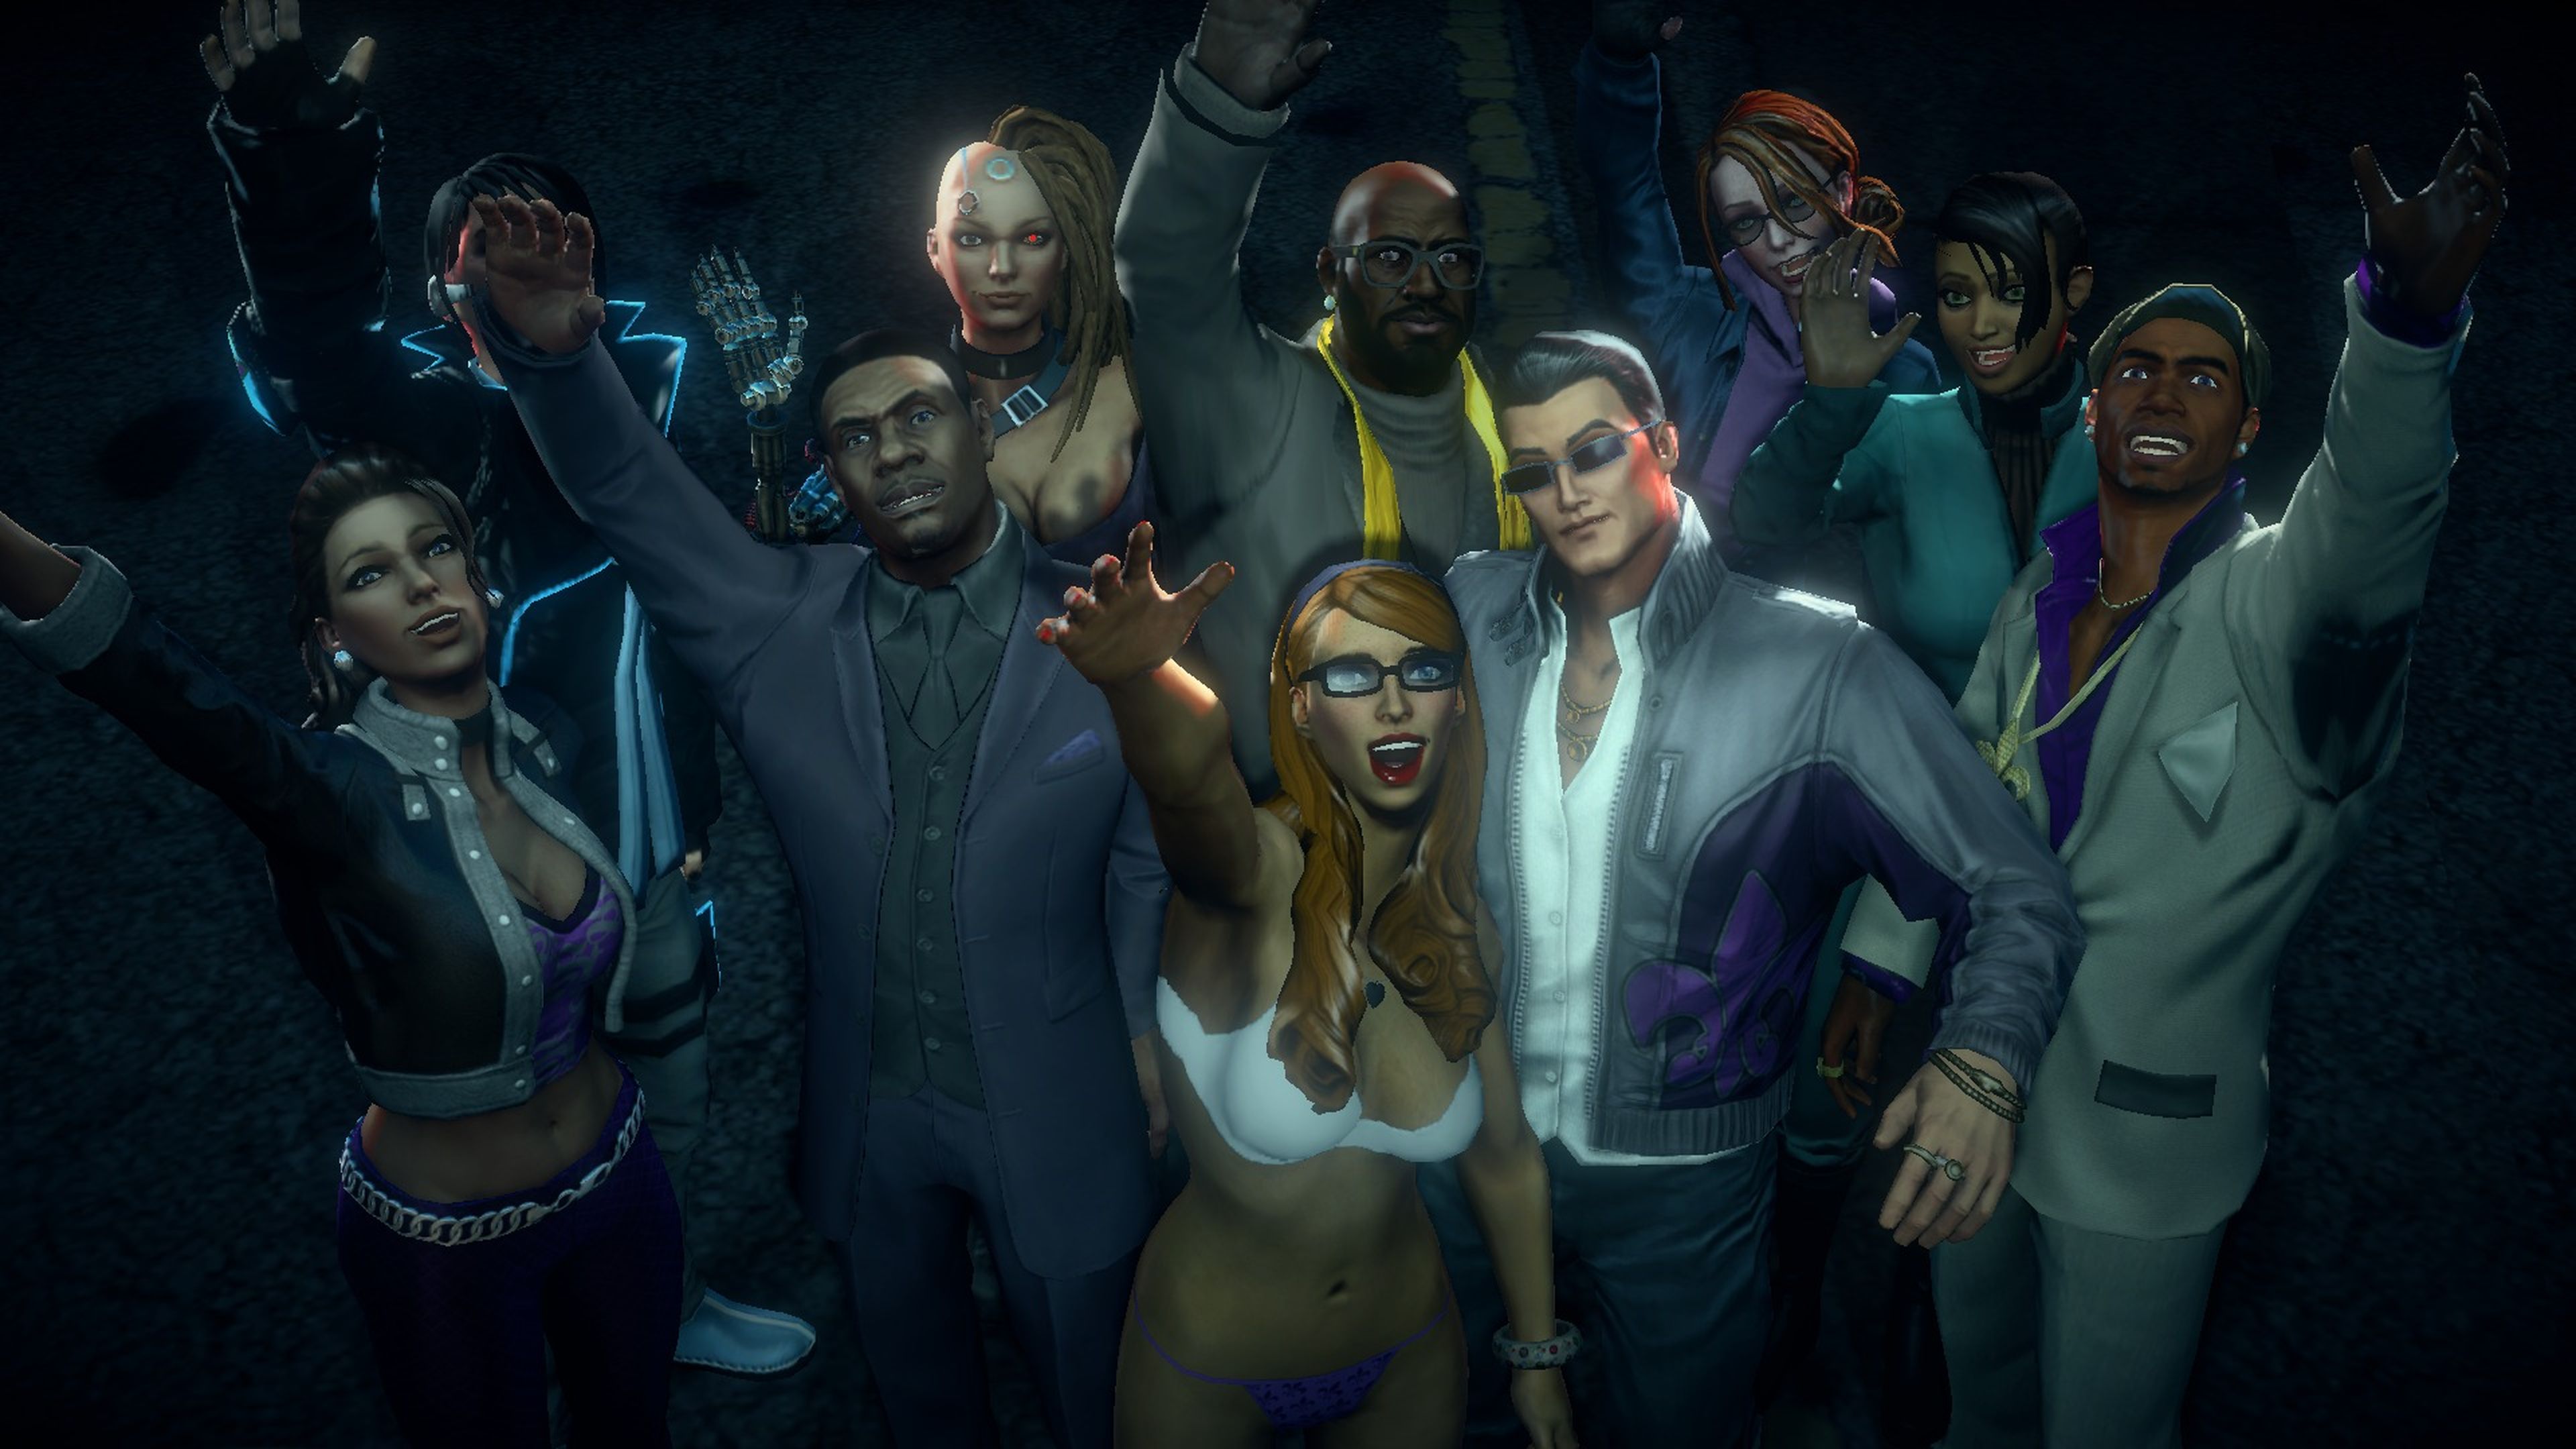 Análisis de Saints Row IV: Re-Elected y Gat out of Hell